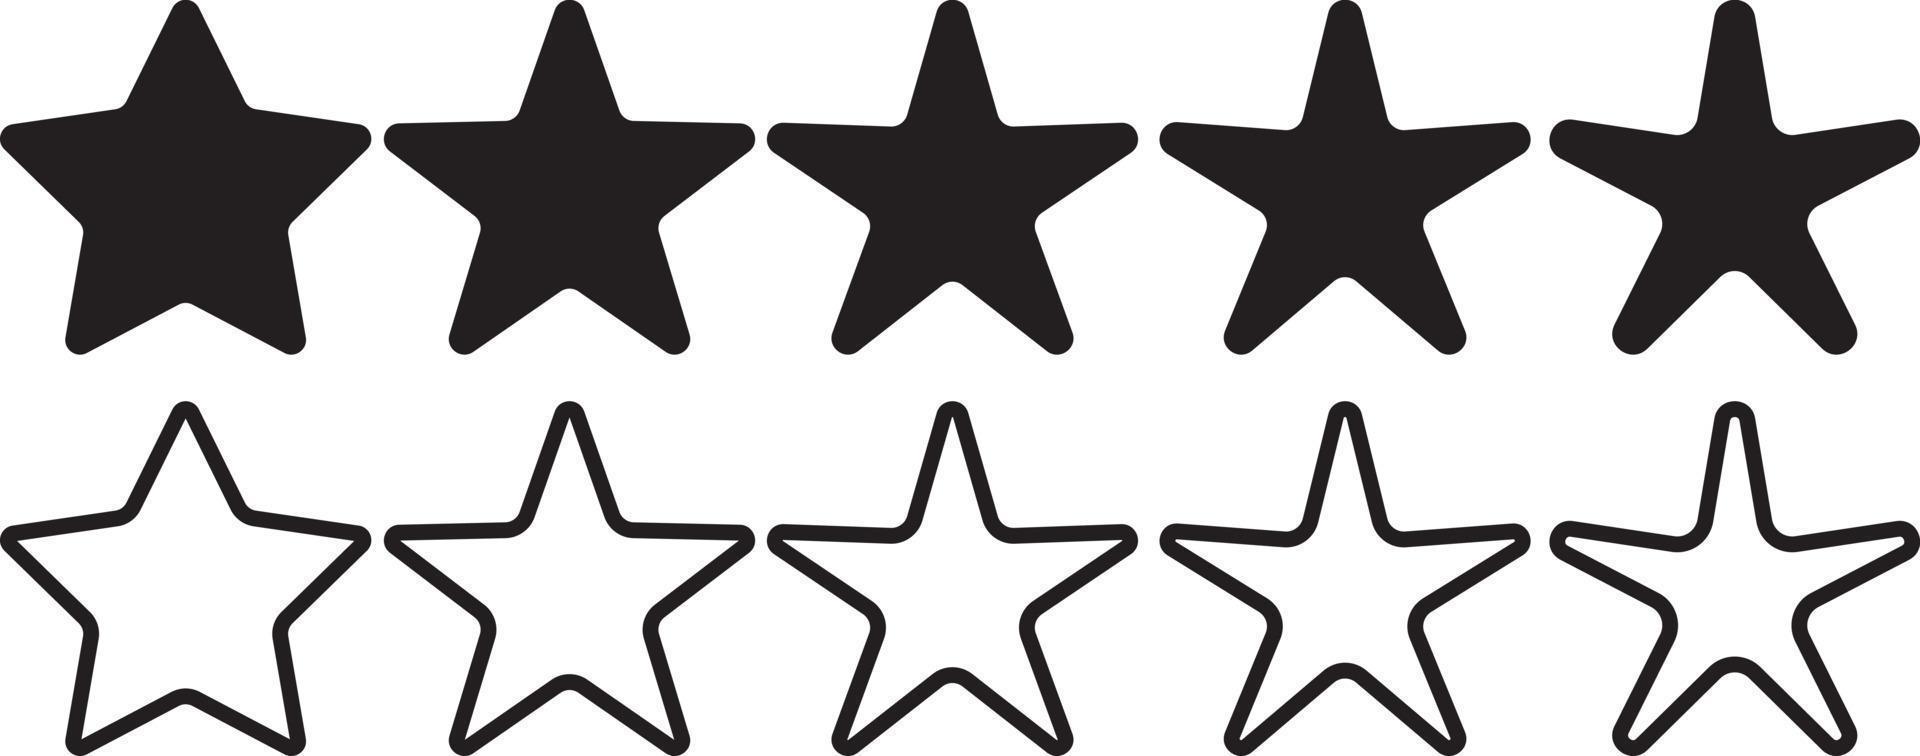 Big set of star icons. Rating star signs collection vector